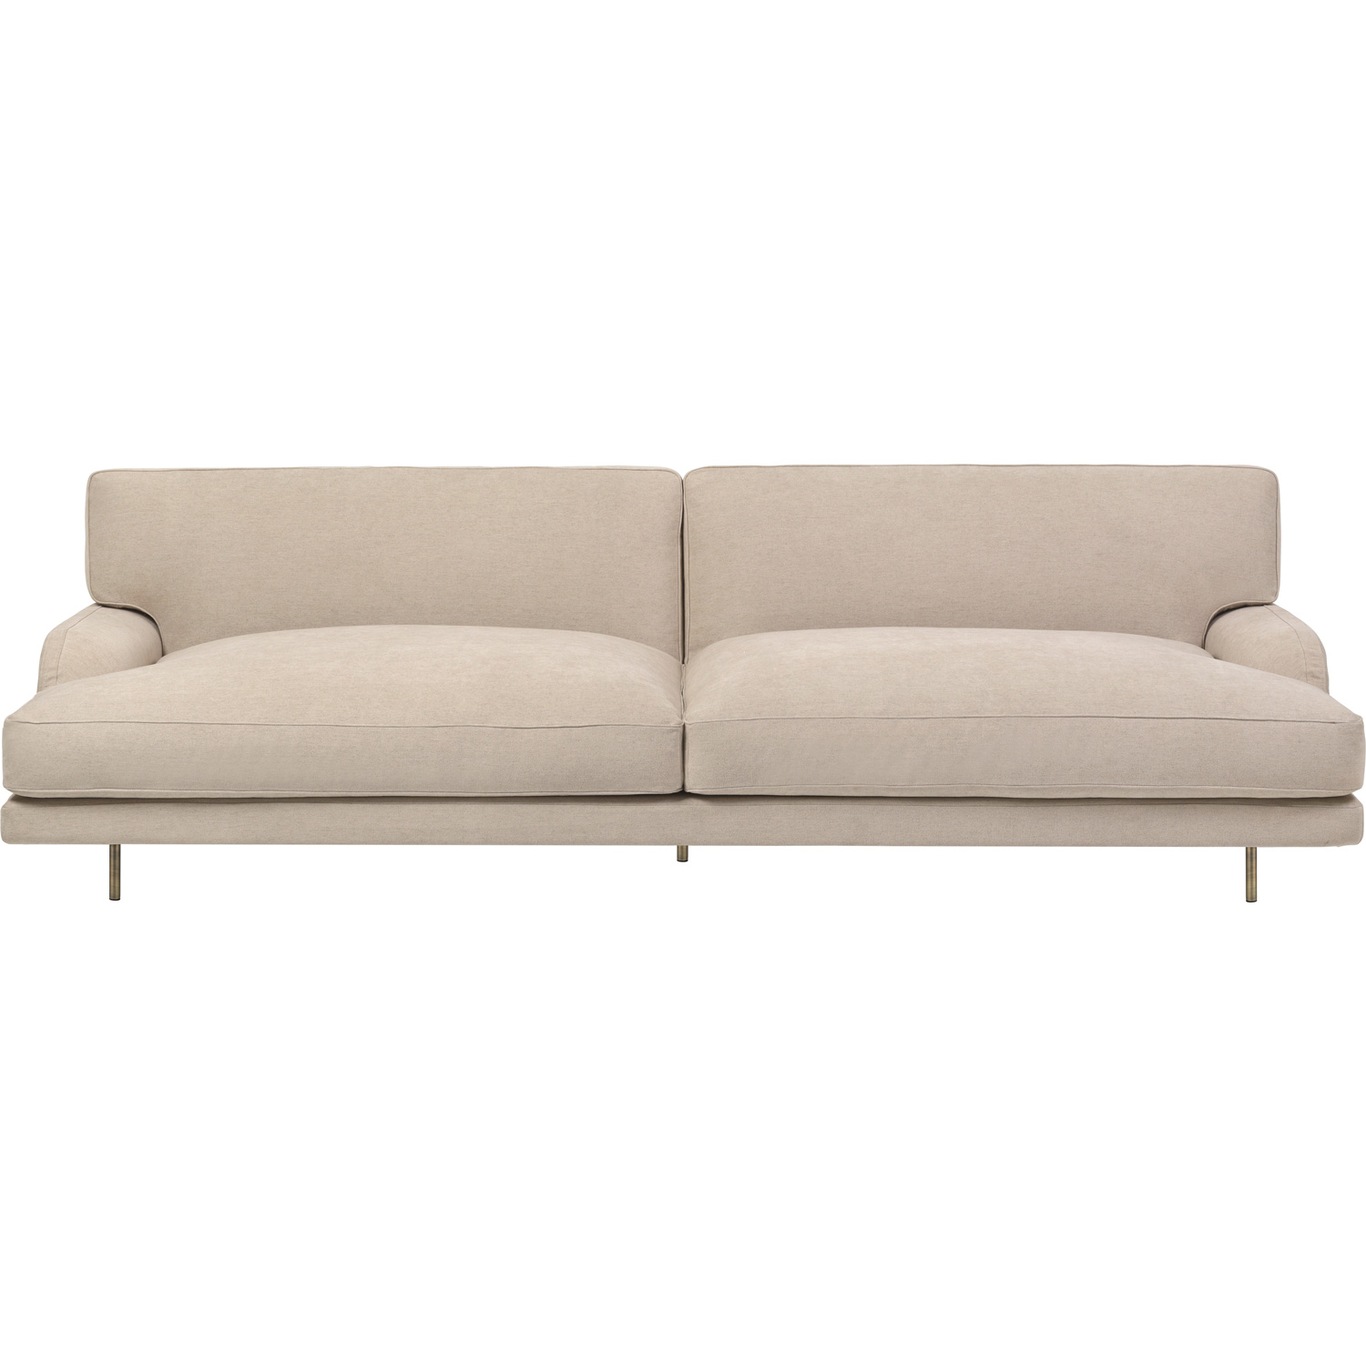 Flaneur Sofa LC 2,5-seters, Ben Messing / Hot Madison 073 Beige